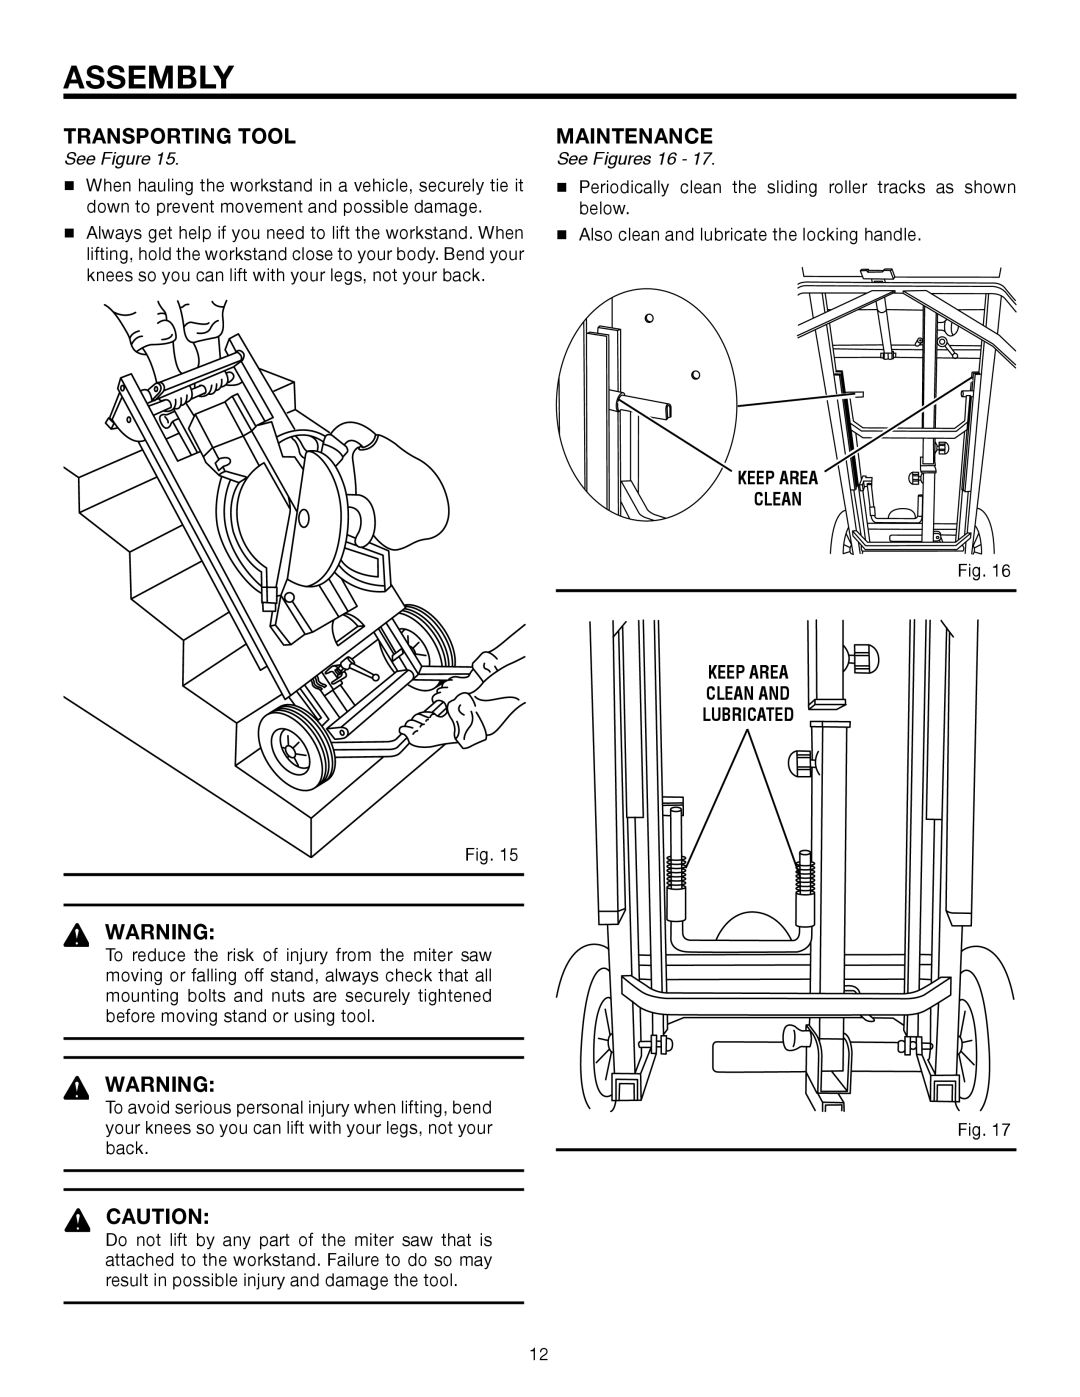 RIDGID AC99402 manual Transporting Tool, Maintenance, See Figures 16, Keep Area Clean And Lubricated, Assembly 